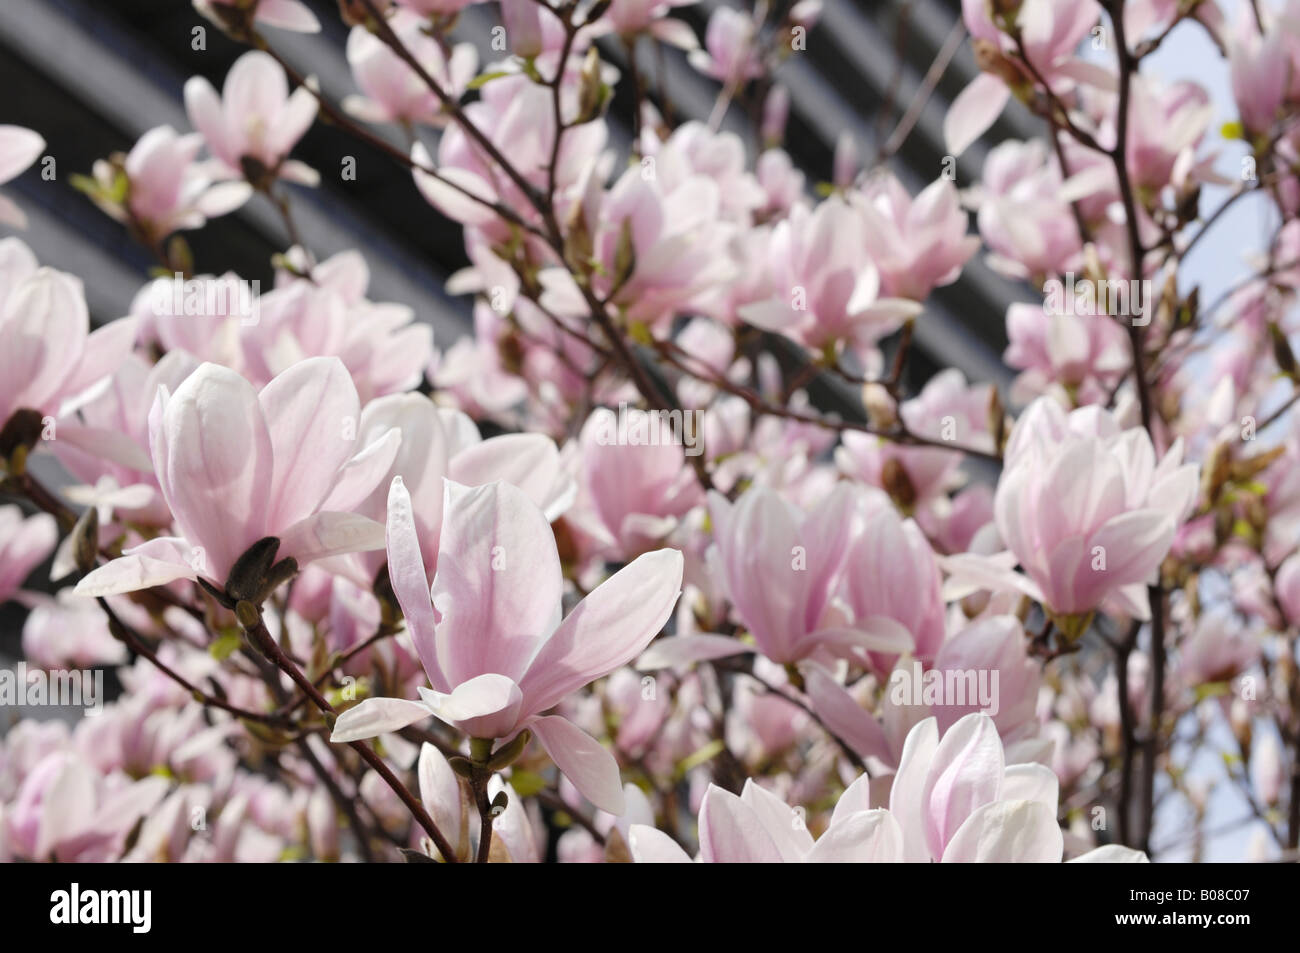 Blooming magnolia tree in the city Stock Photo